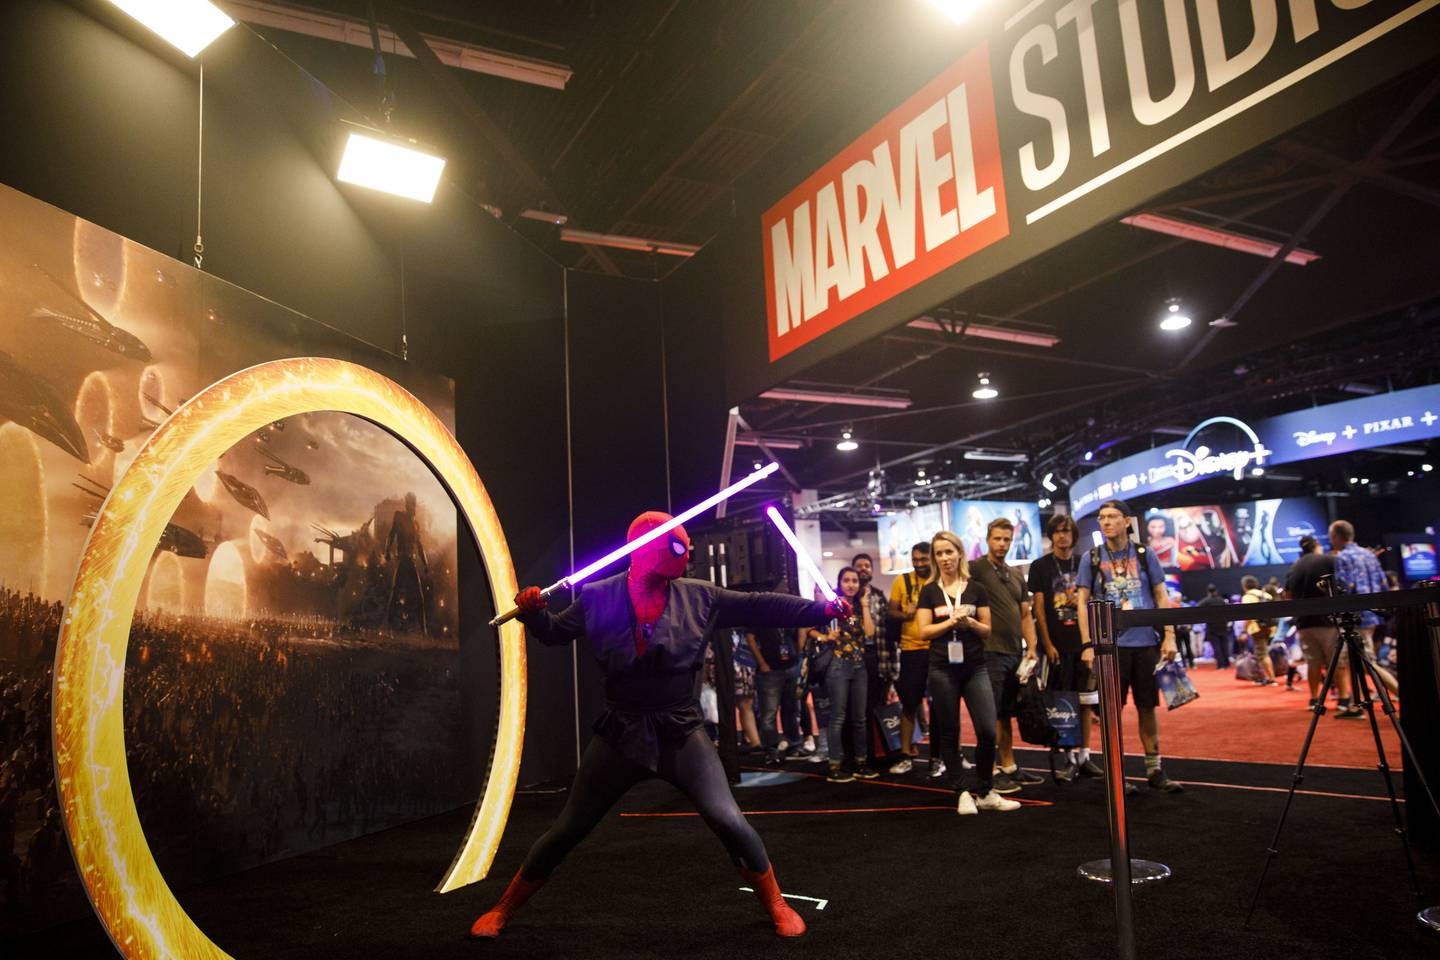 An attendee dressed as Spider-Man holds lightsabers at a Marvel Studios photo booth during the D23 Expo 2019 in Anaheim, California, U.S., on Friday, Aug. 23, 2019. Walt Disney Co. is turning the D23 Expo, the biennial fan conclave, into a big push for its new streaming services. Photographer: Patrick T. Fallon/Bloomberg